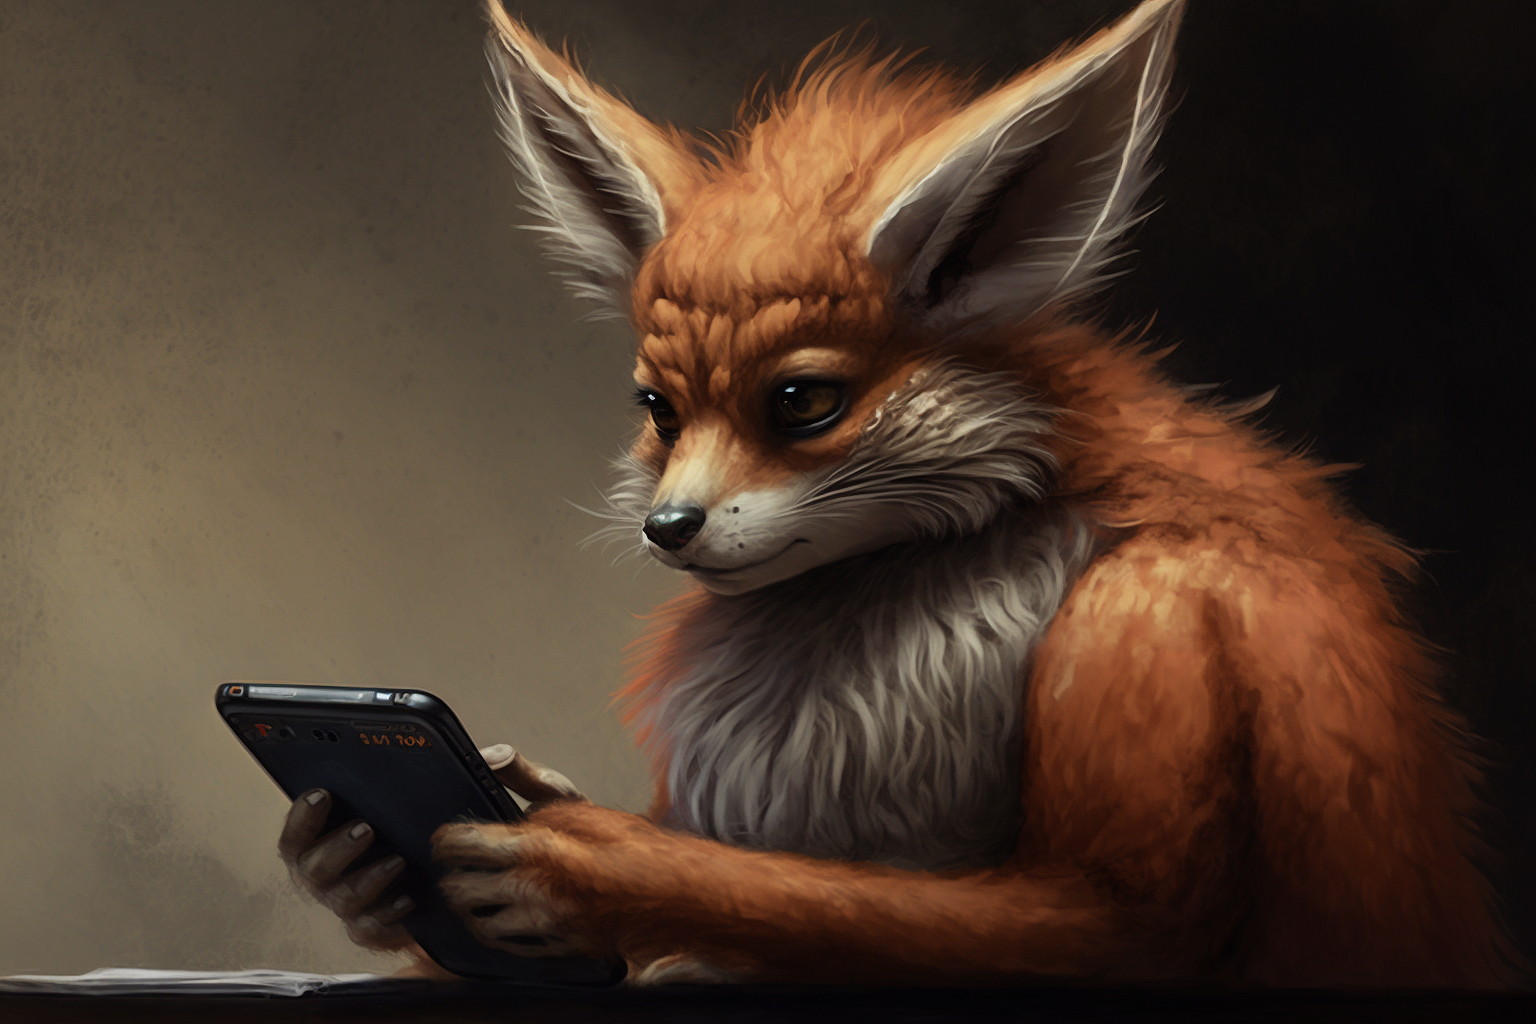 imparsifal infocalipsis furry with a smartphone hiperrealistic 3c990dc6 e256 4a94 ad4f 6fd65b6ede40